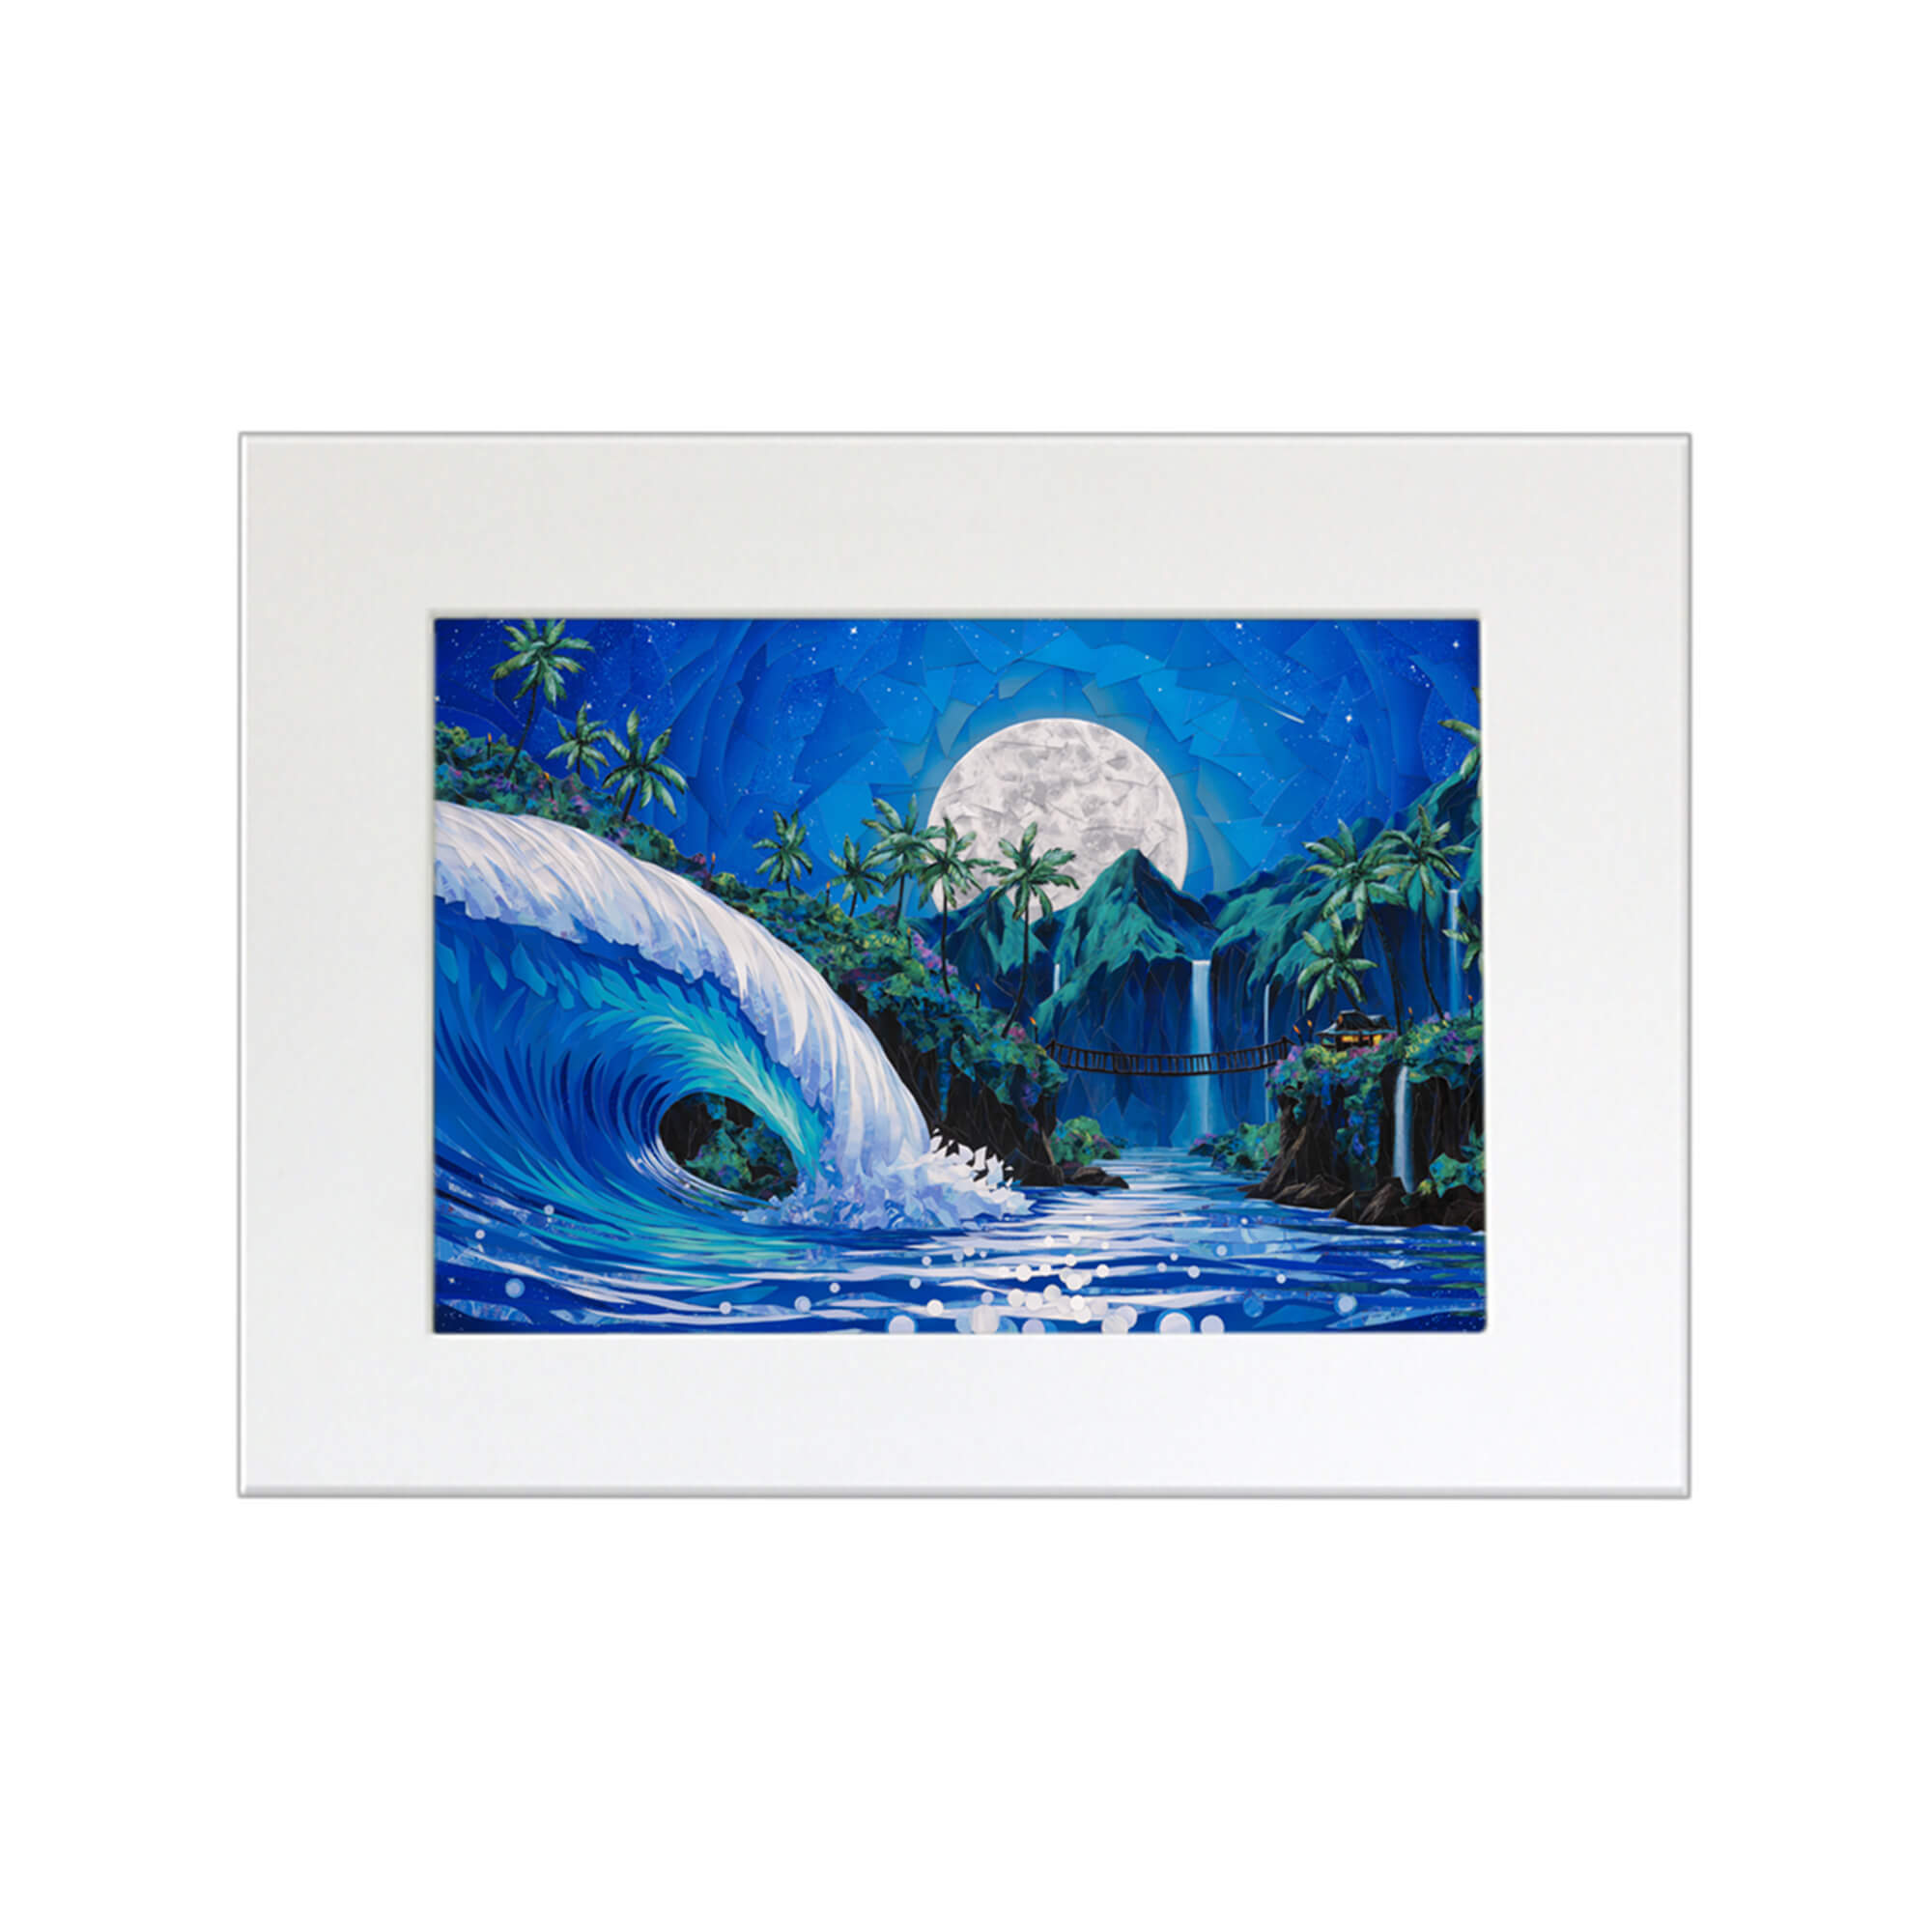 A matted art print featuring a collage of an evening view of a tropical landscape with a huge rolling wave, several waterfalls, and a full moon background by Hawaii artist Patrick Parker